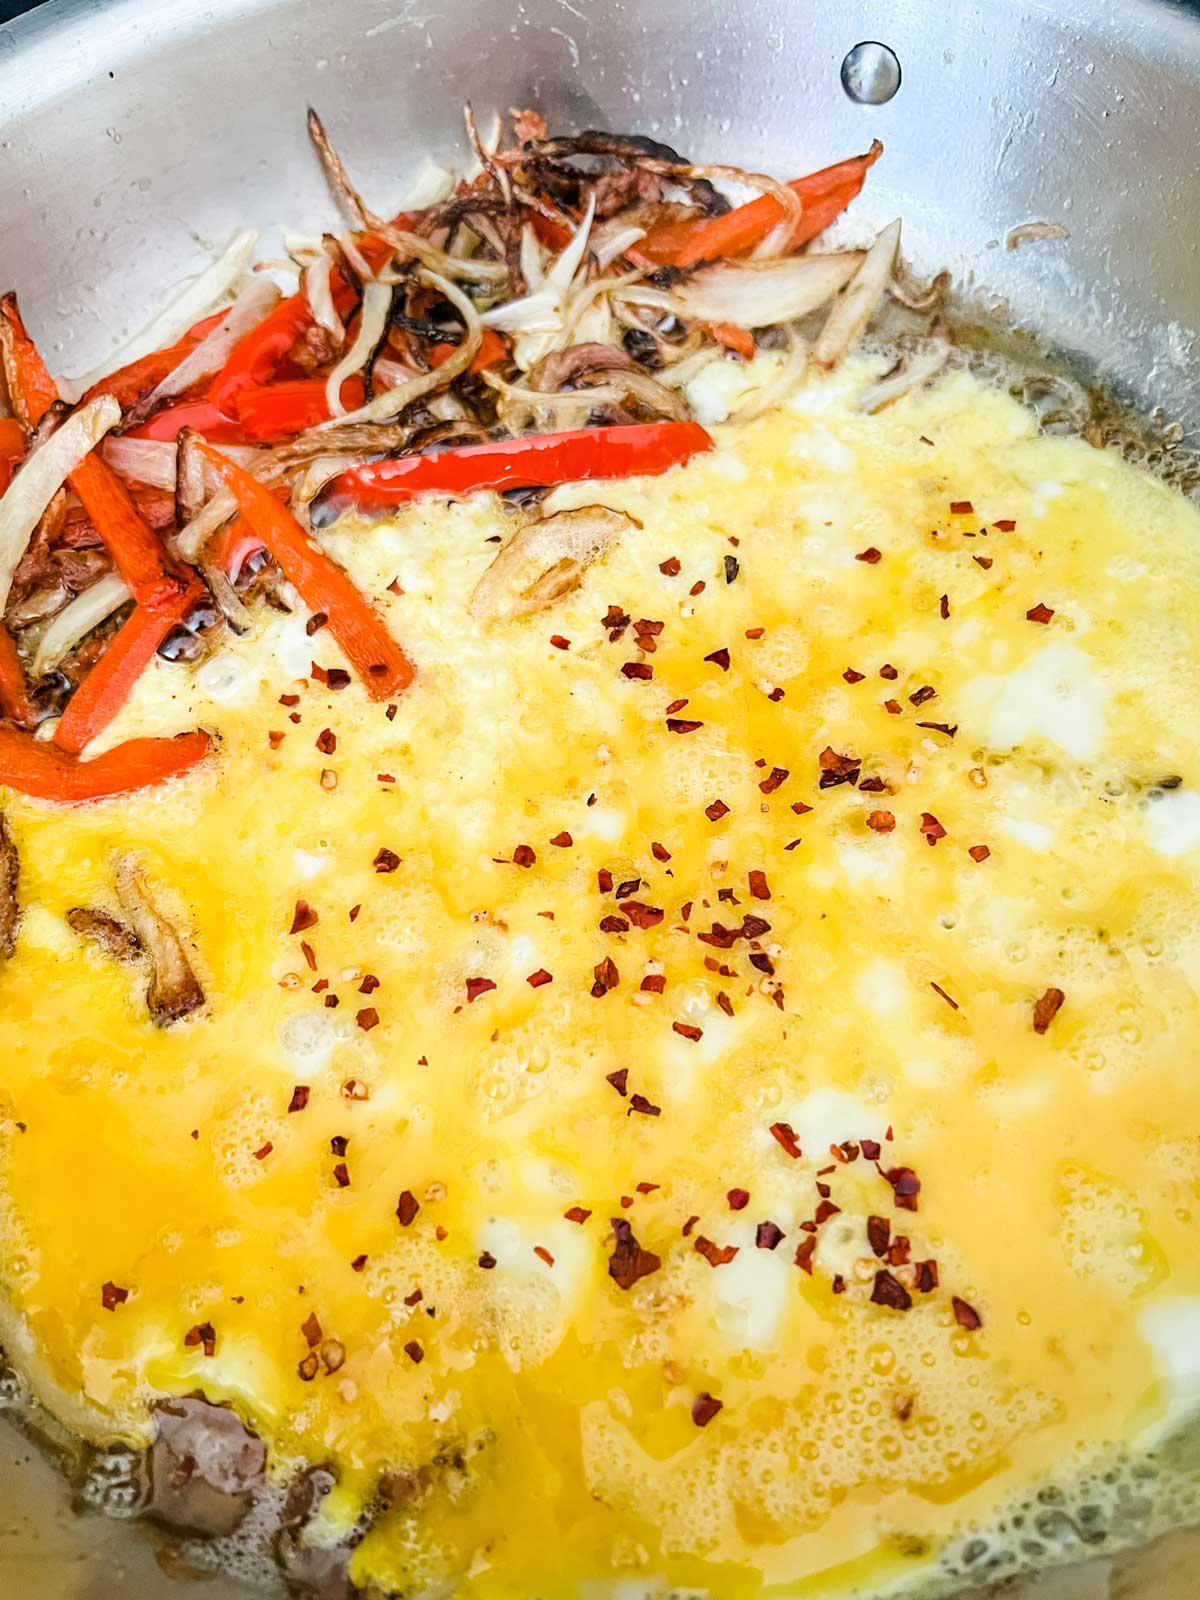 Eggs sprinkled with red pepper flakes sitting next to sauteed onions and peppers in a skillet.